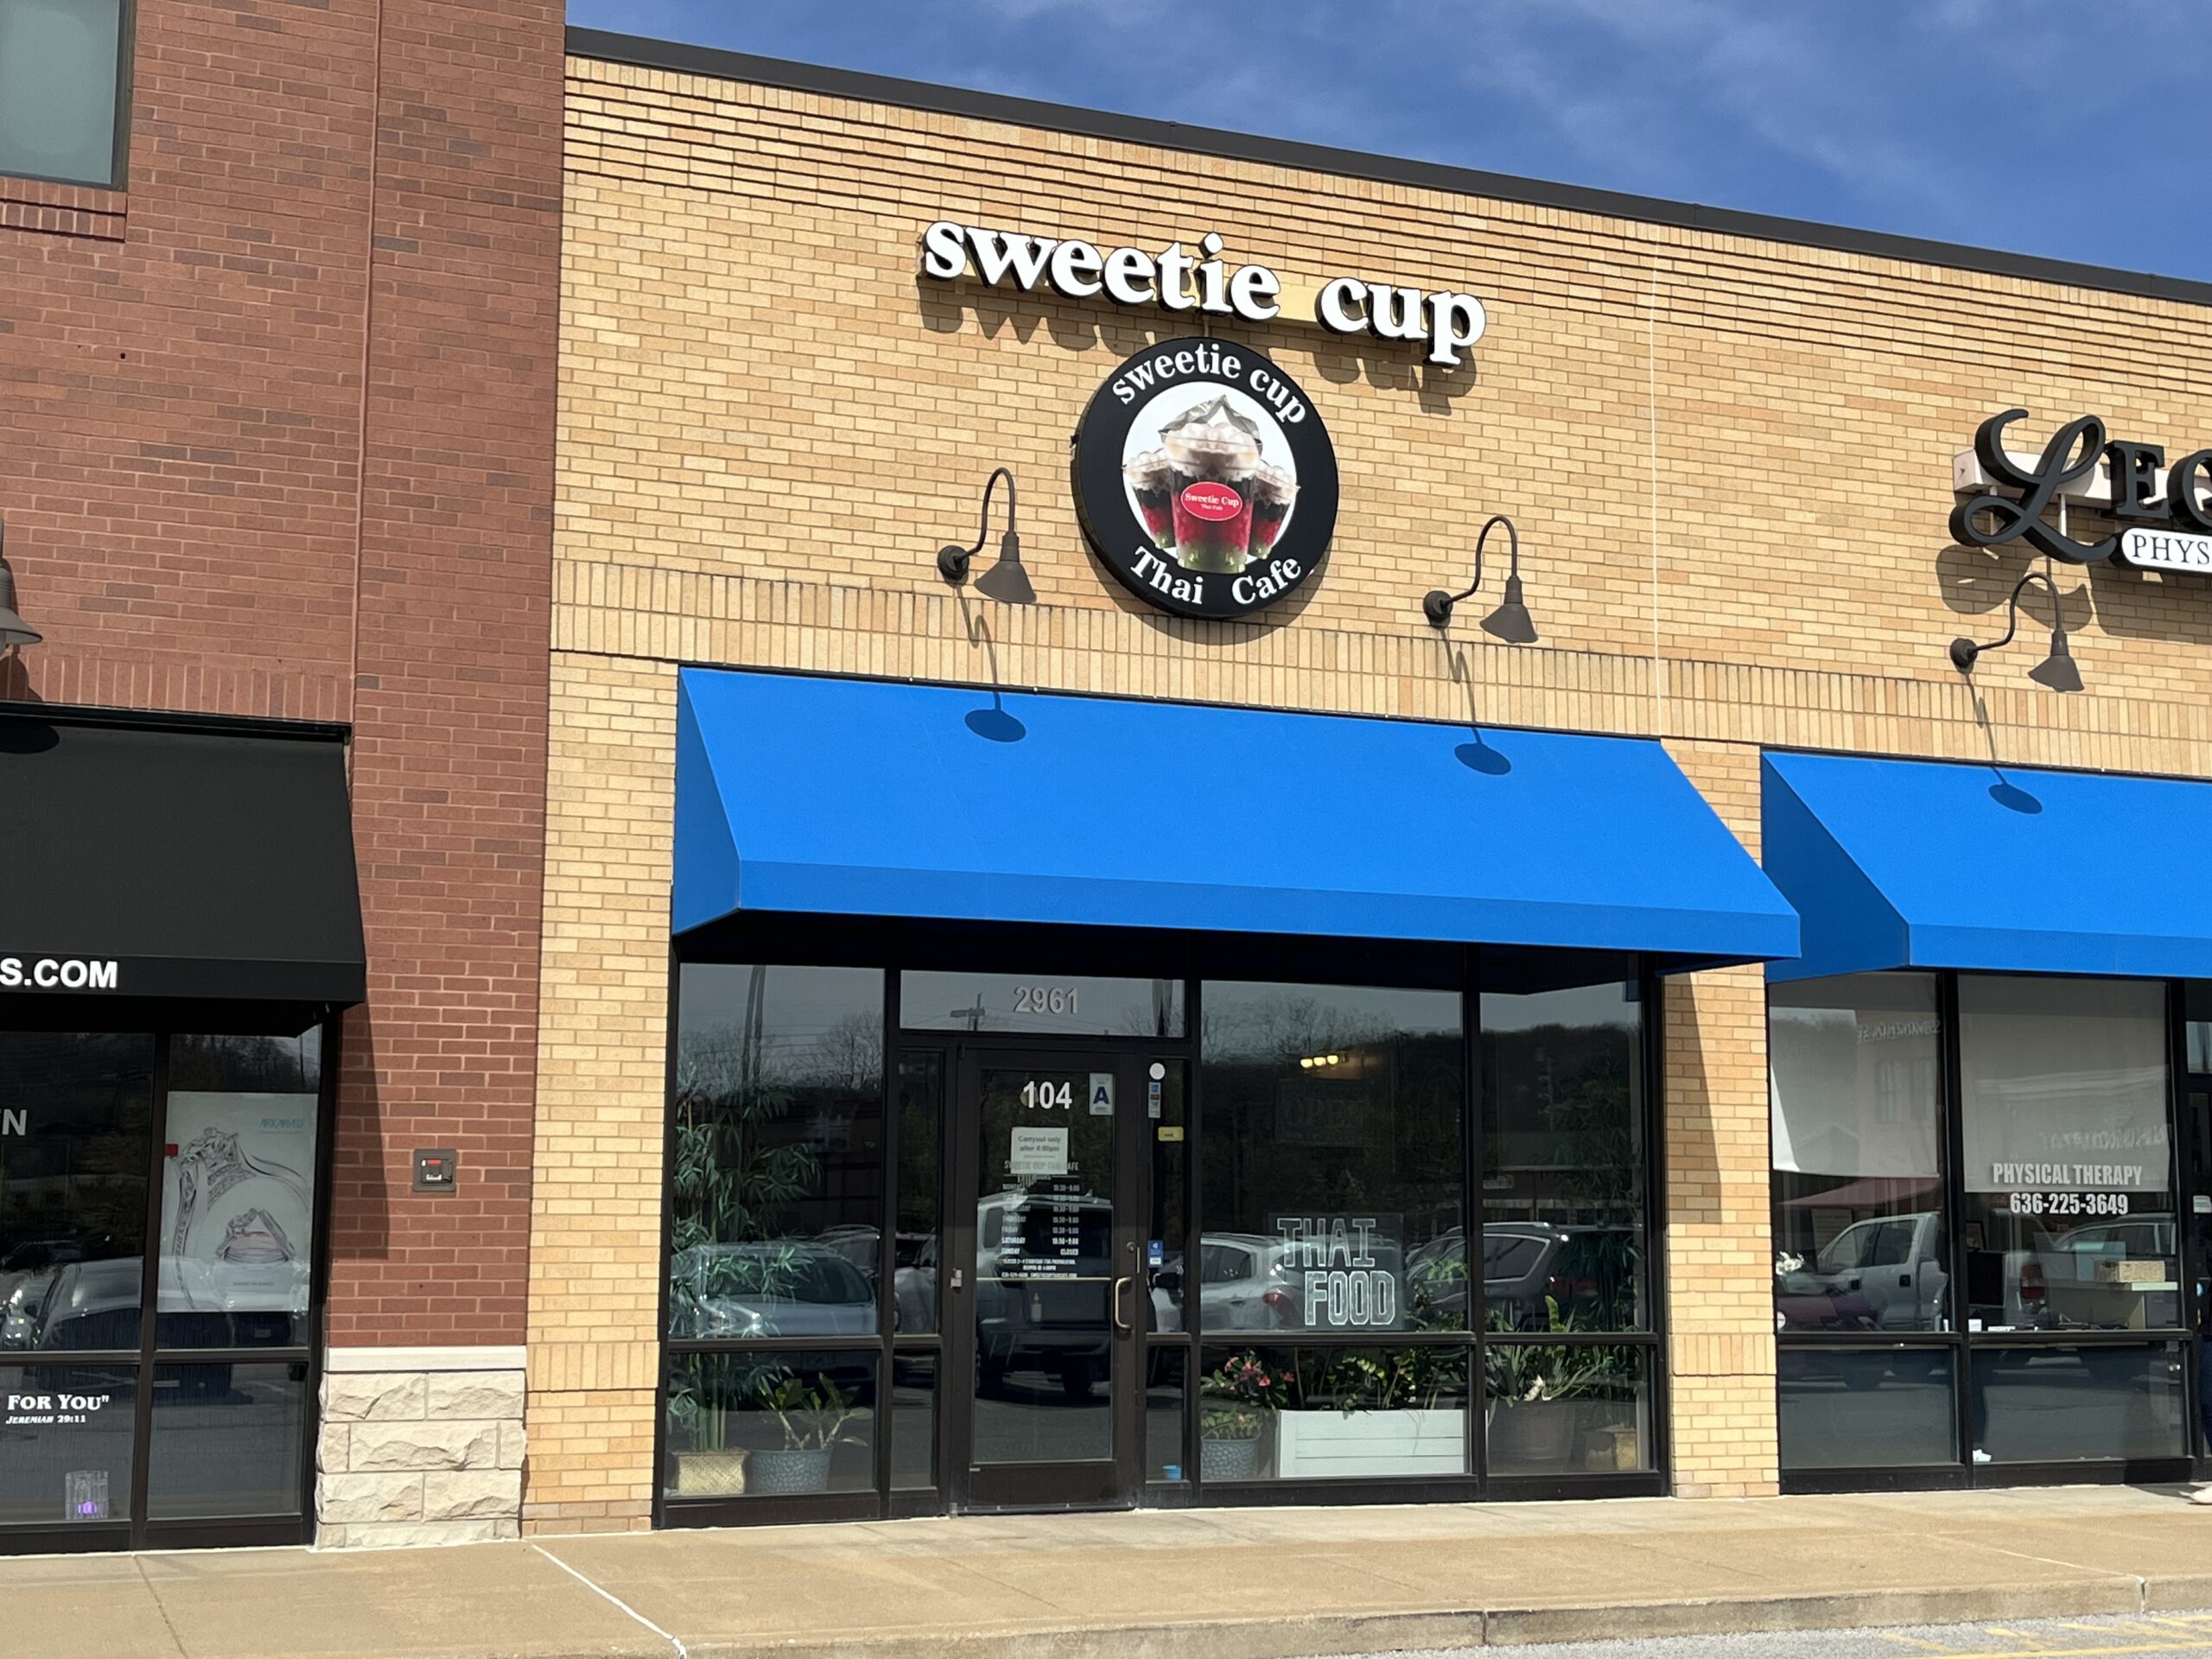 Sweetie Cup Thai Café Resumes Business Operations